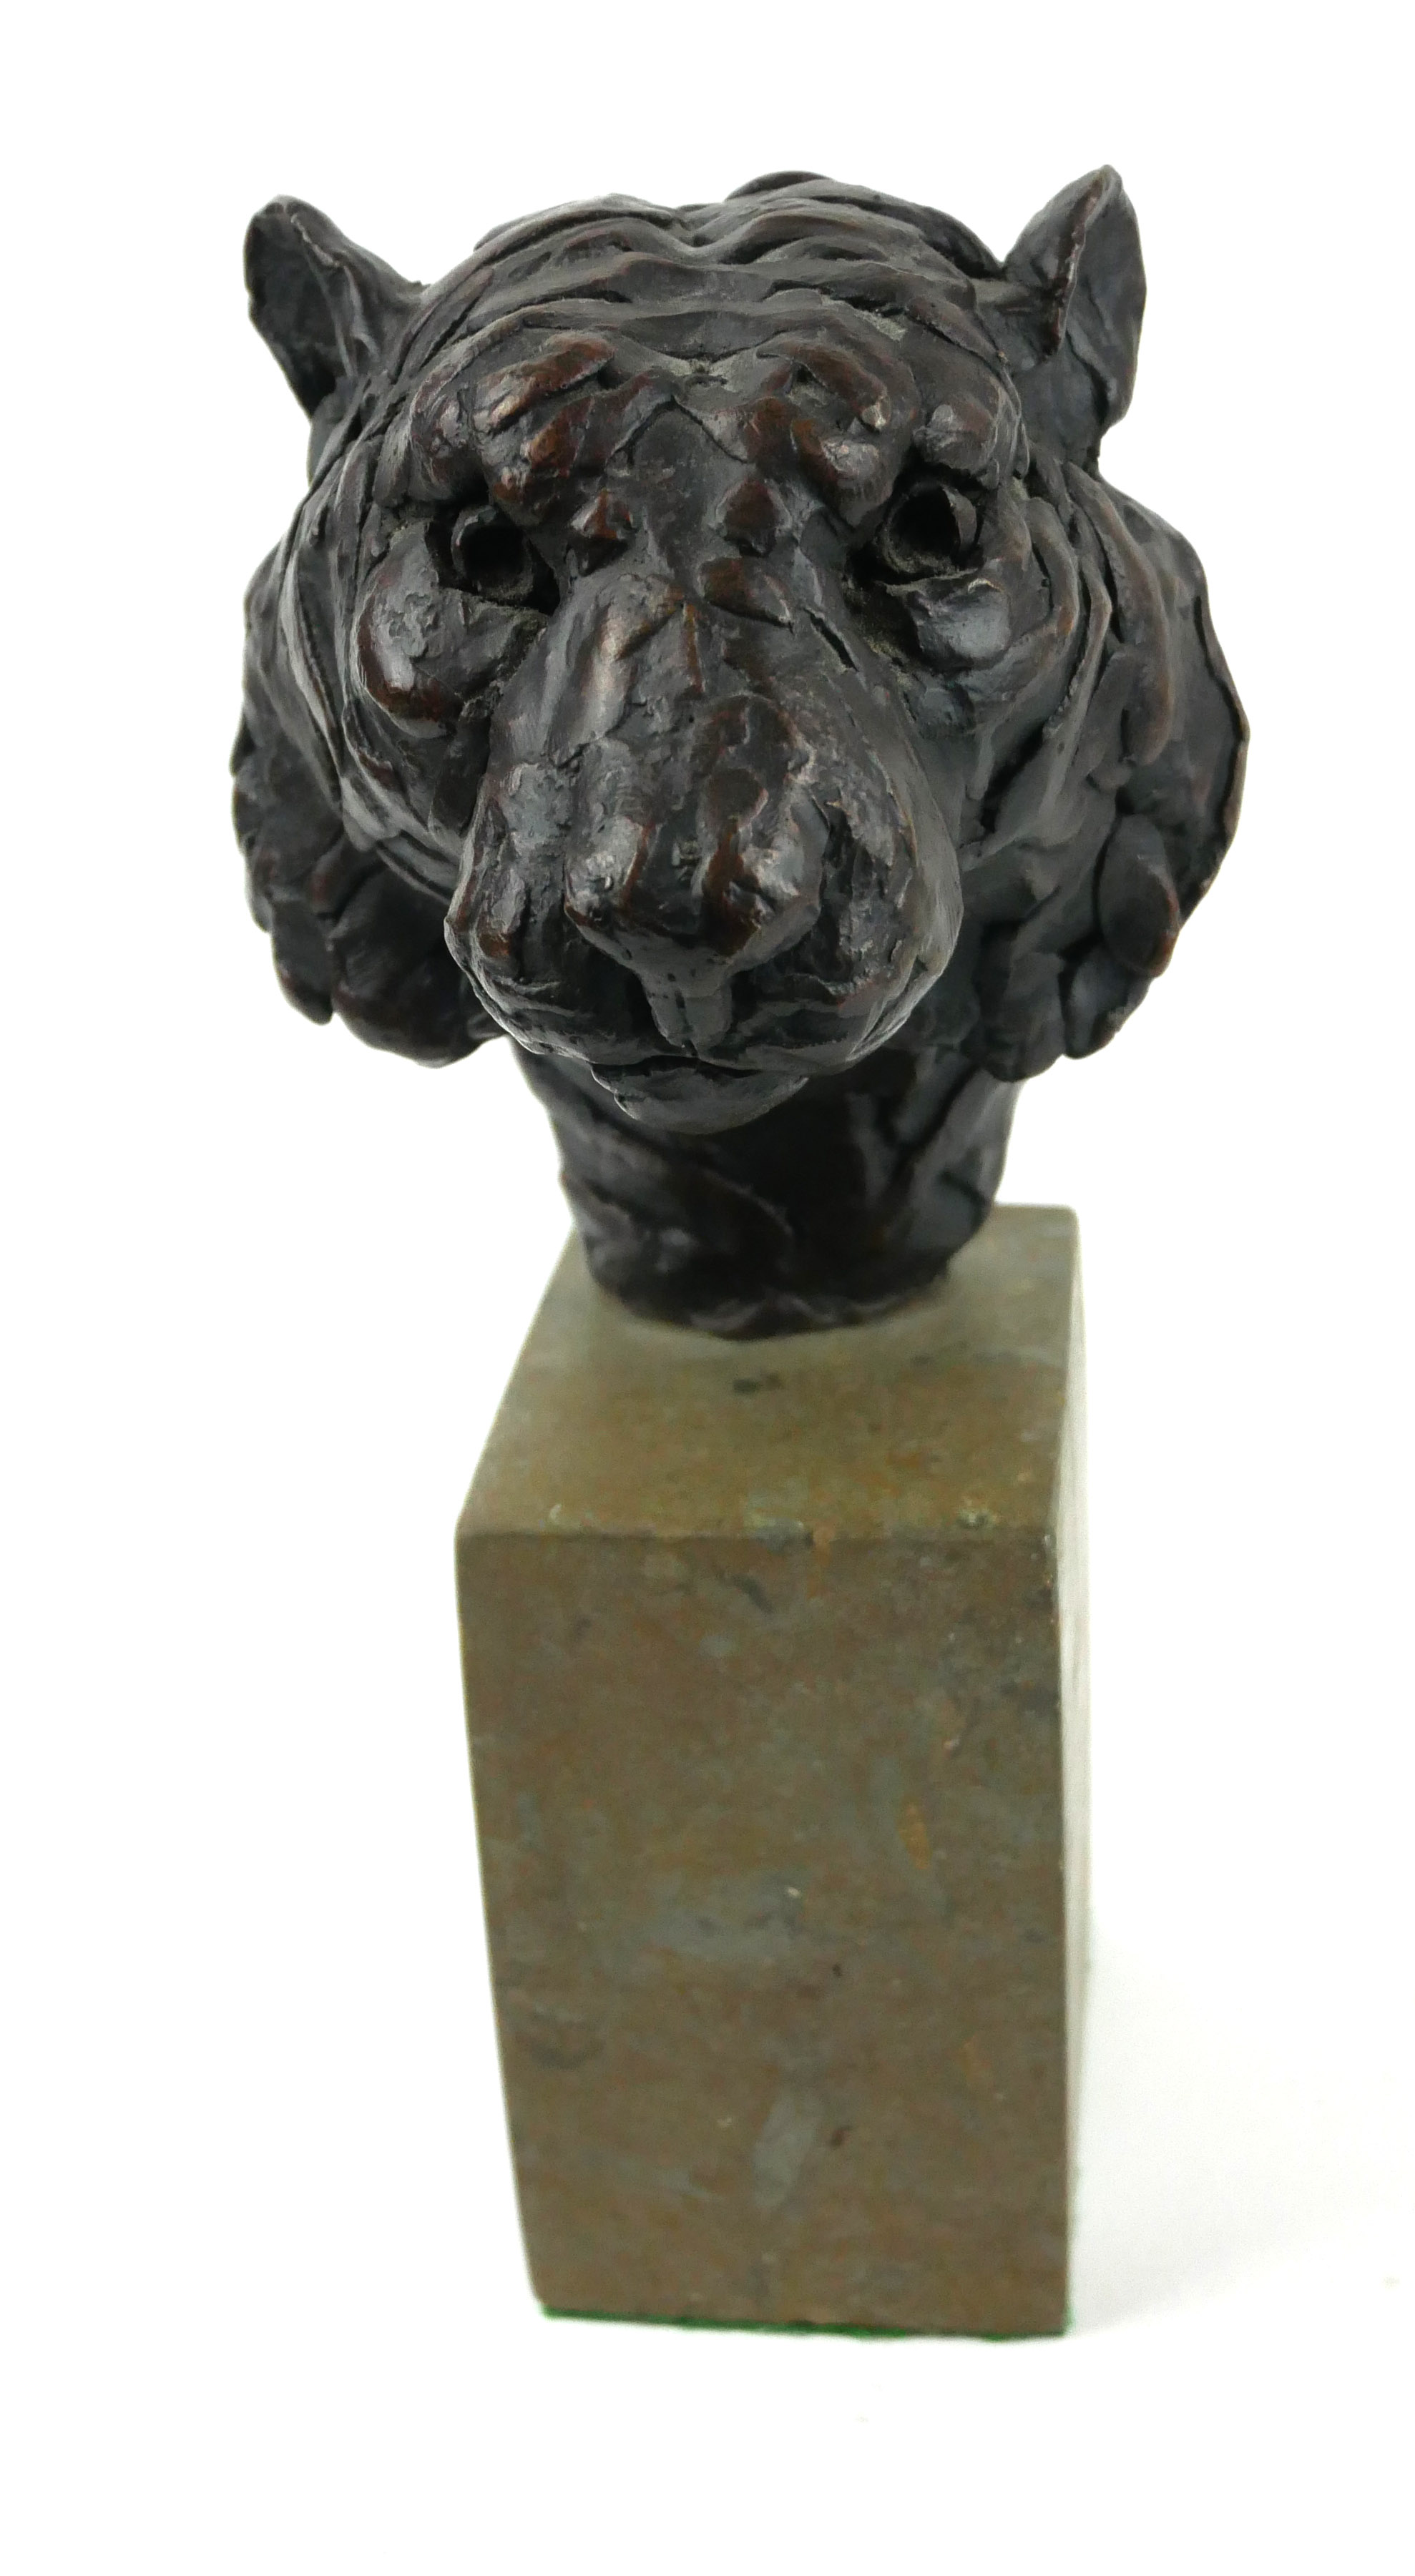 HAMISH MACKIE, BRITISH, BN 1973, A BRONZE TIGER'S HEAD BUST Signed to rear 'Ham 1999', on a grey - Image 2 of 3